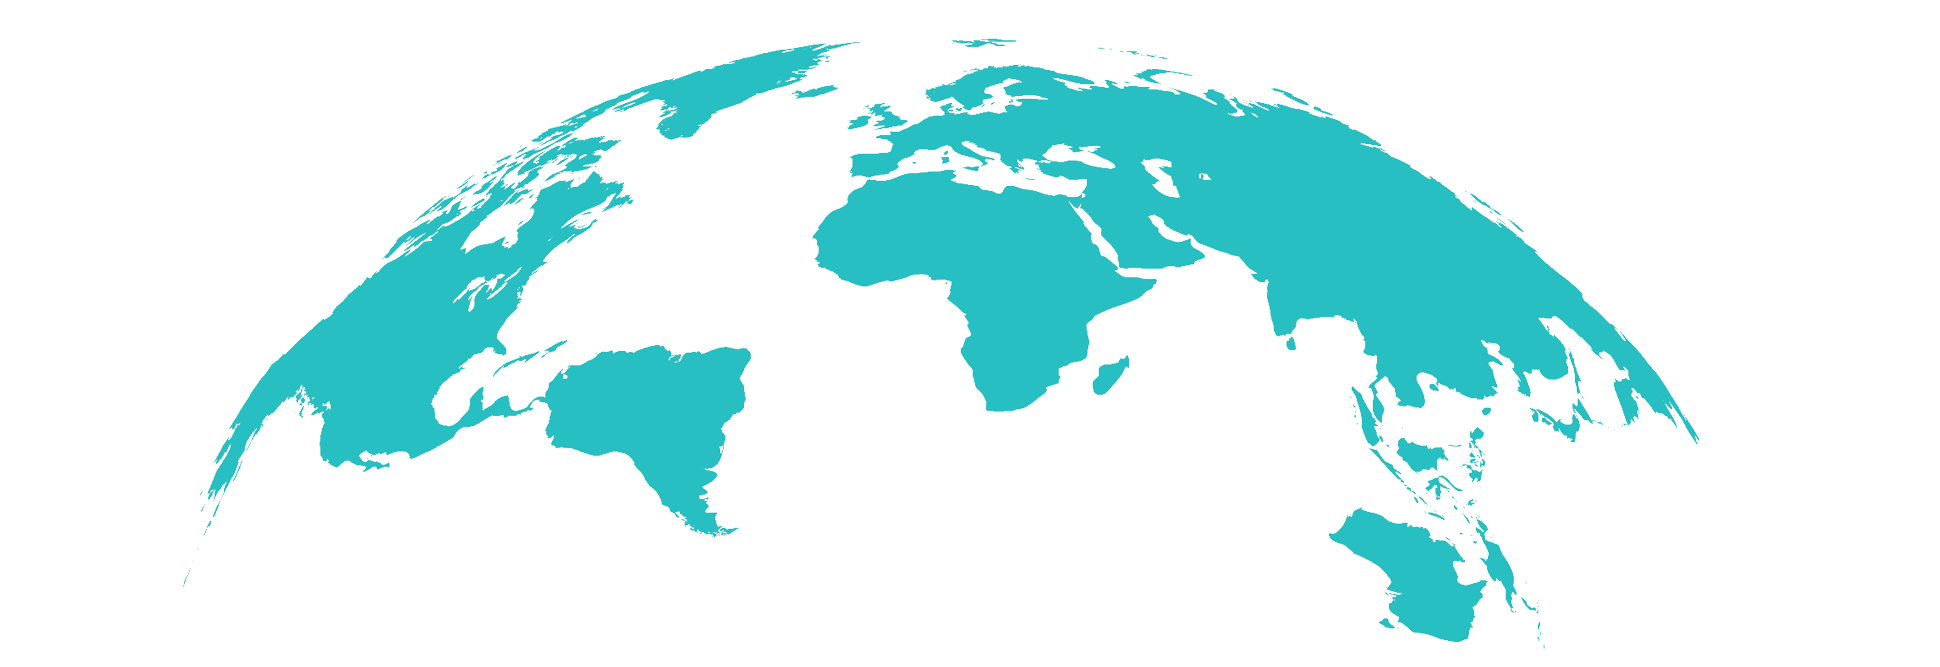 Chapters located in a world map